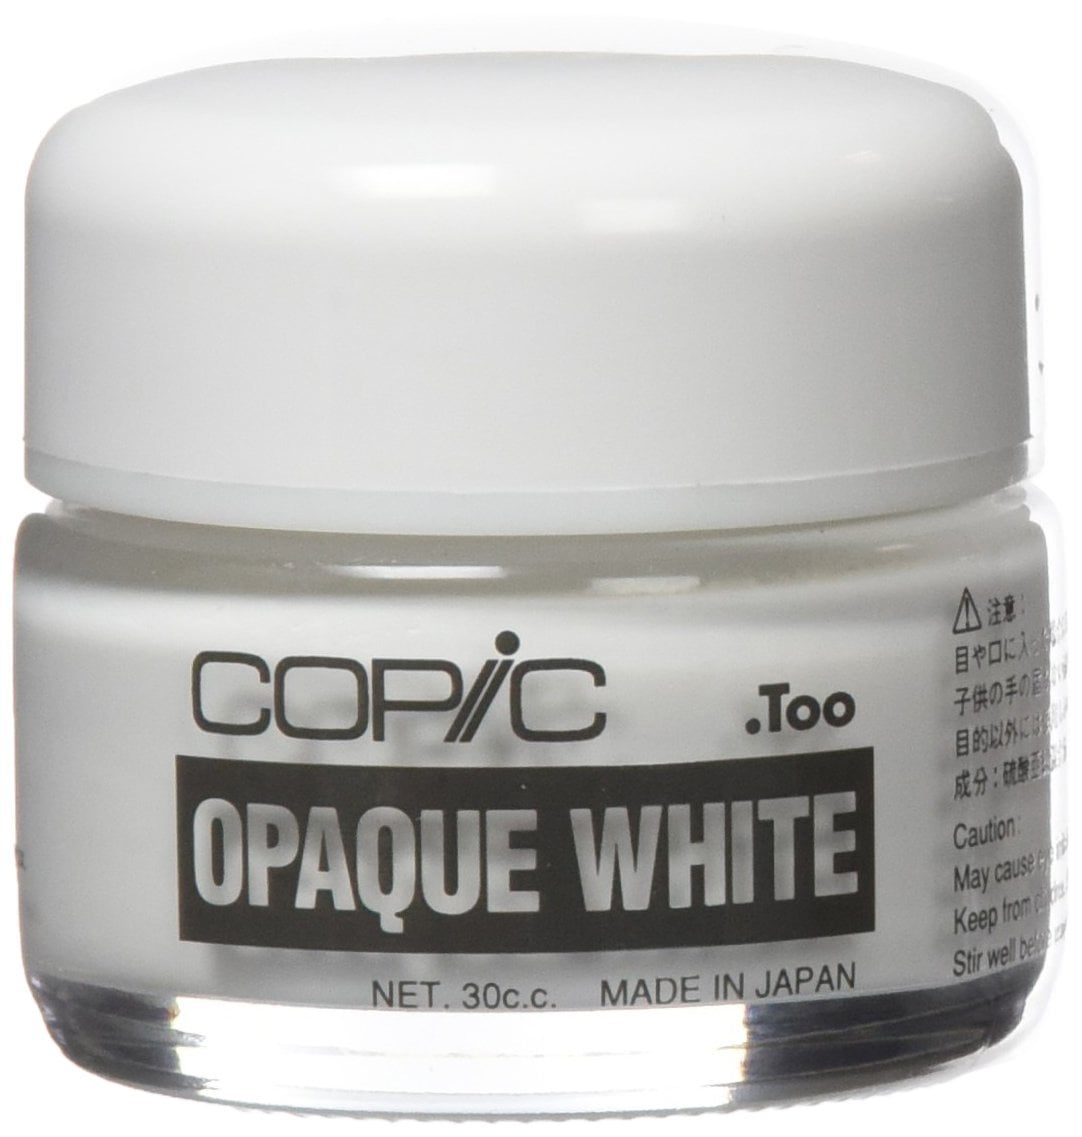 NEW Too Copic Opaque White Pigment 30cc MADE IN JAPAN